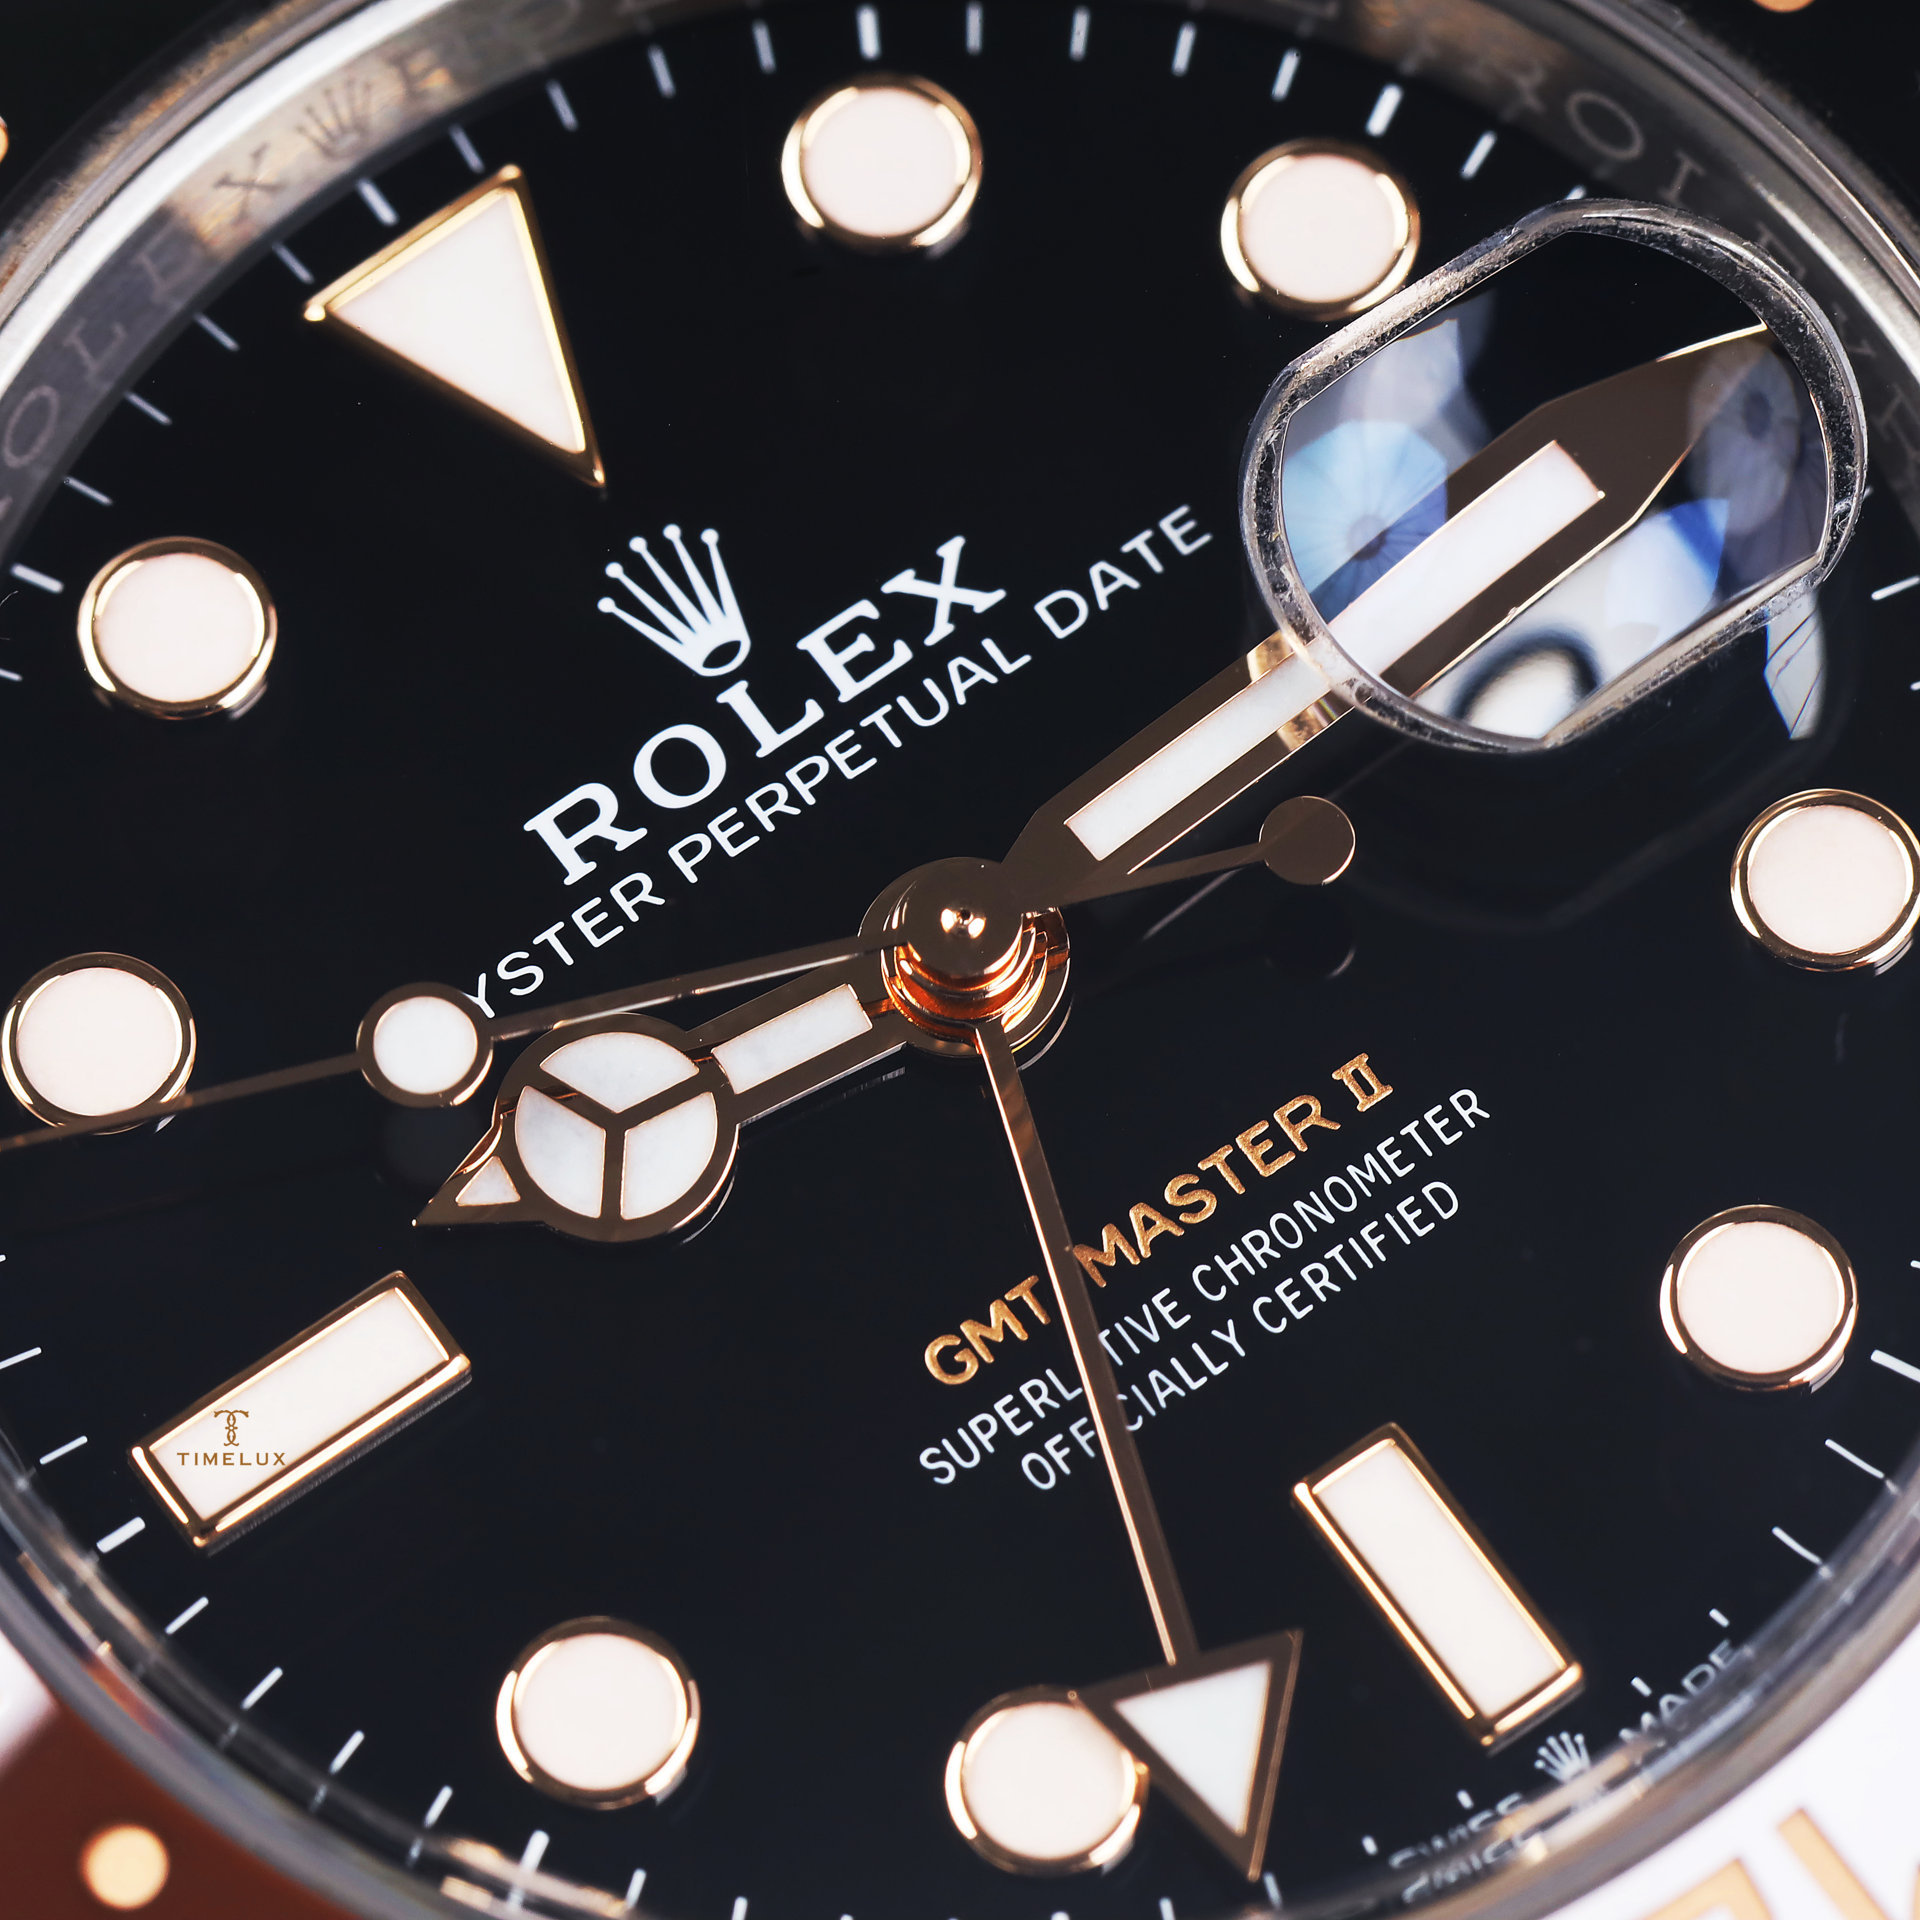 [USED] Đồng Hồ Nam Rolex GMTMASTER II 40mm Rootbeer 126711 CHNR Closeup dial